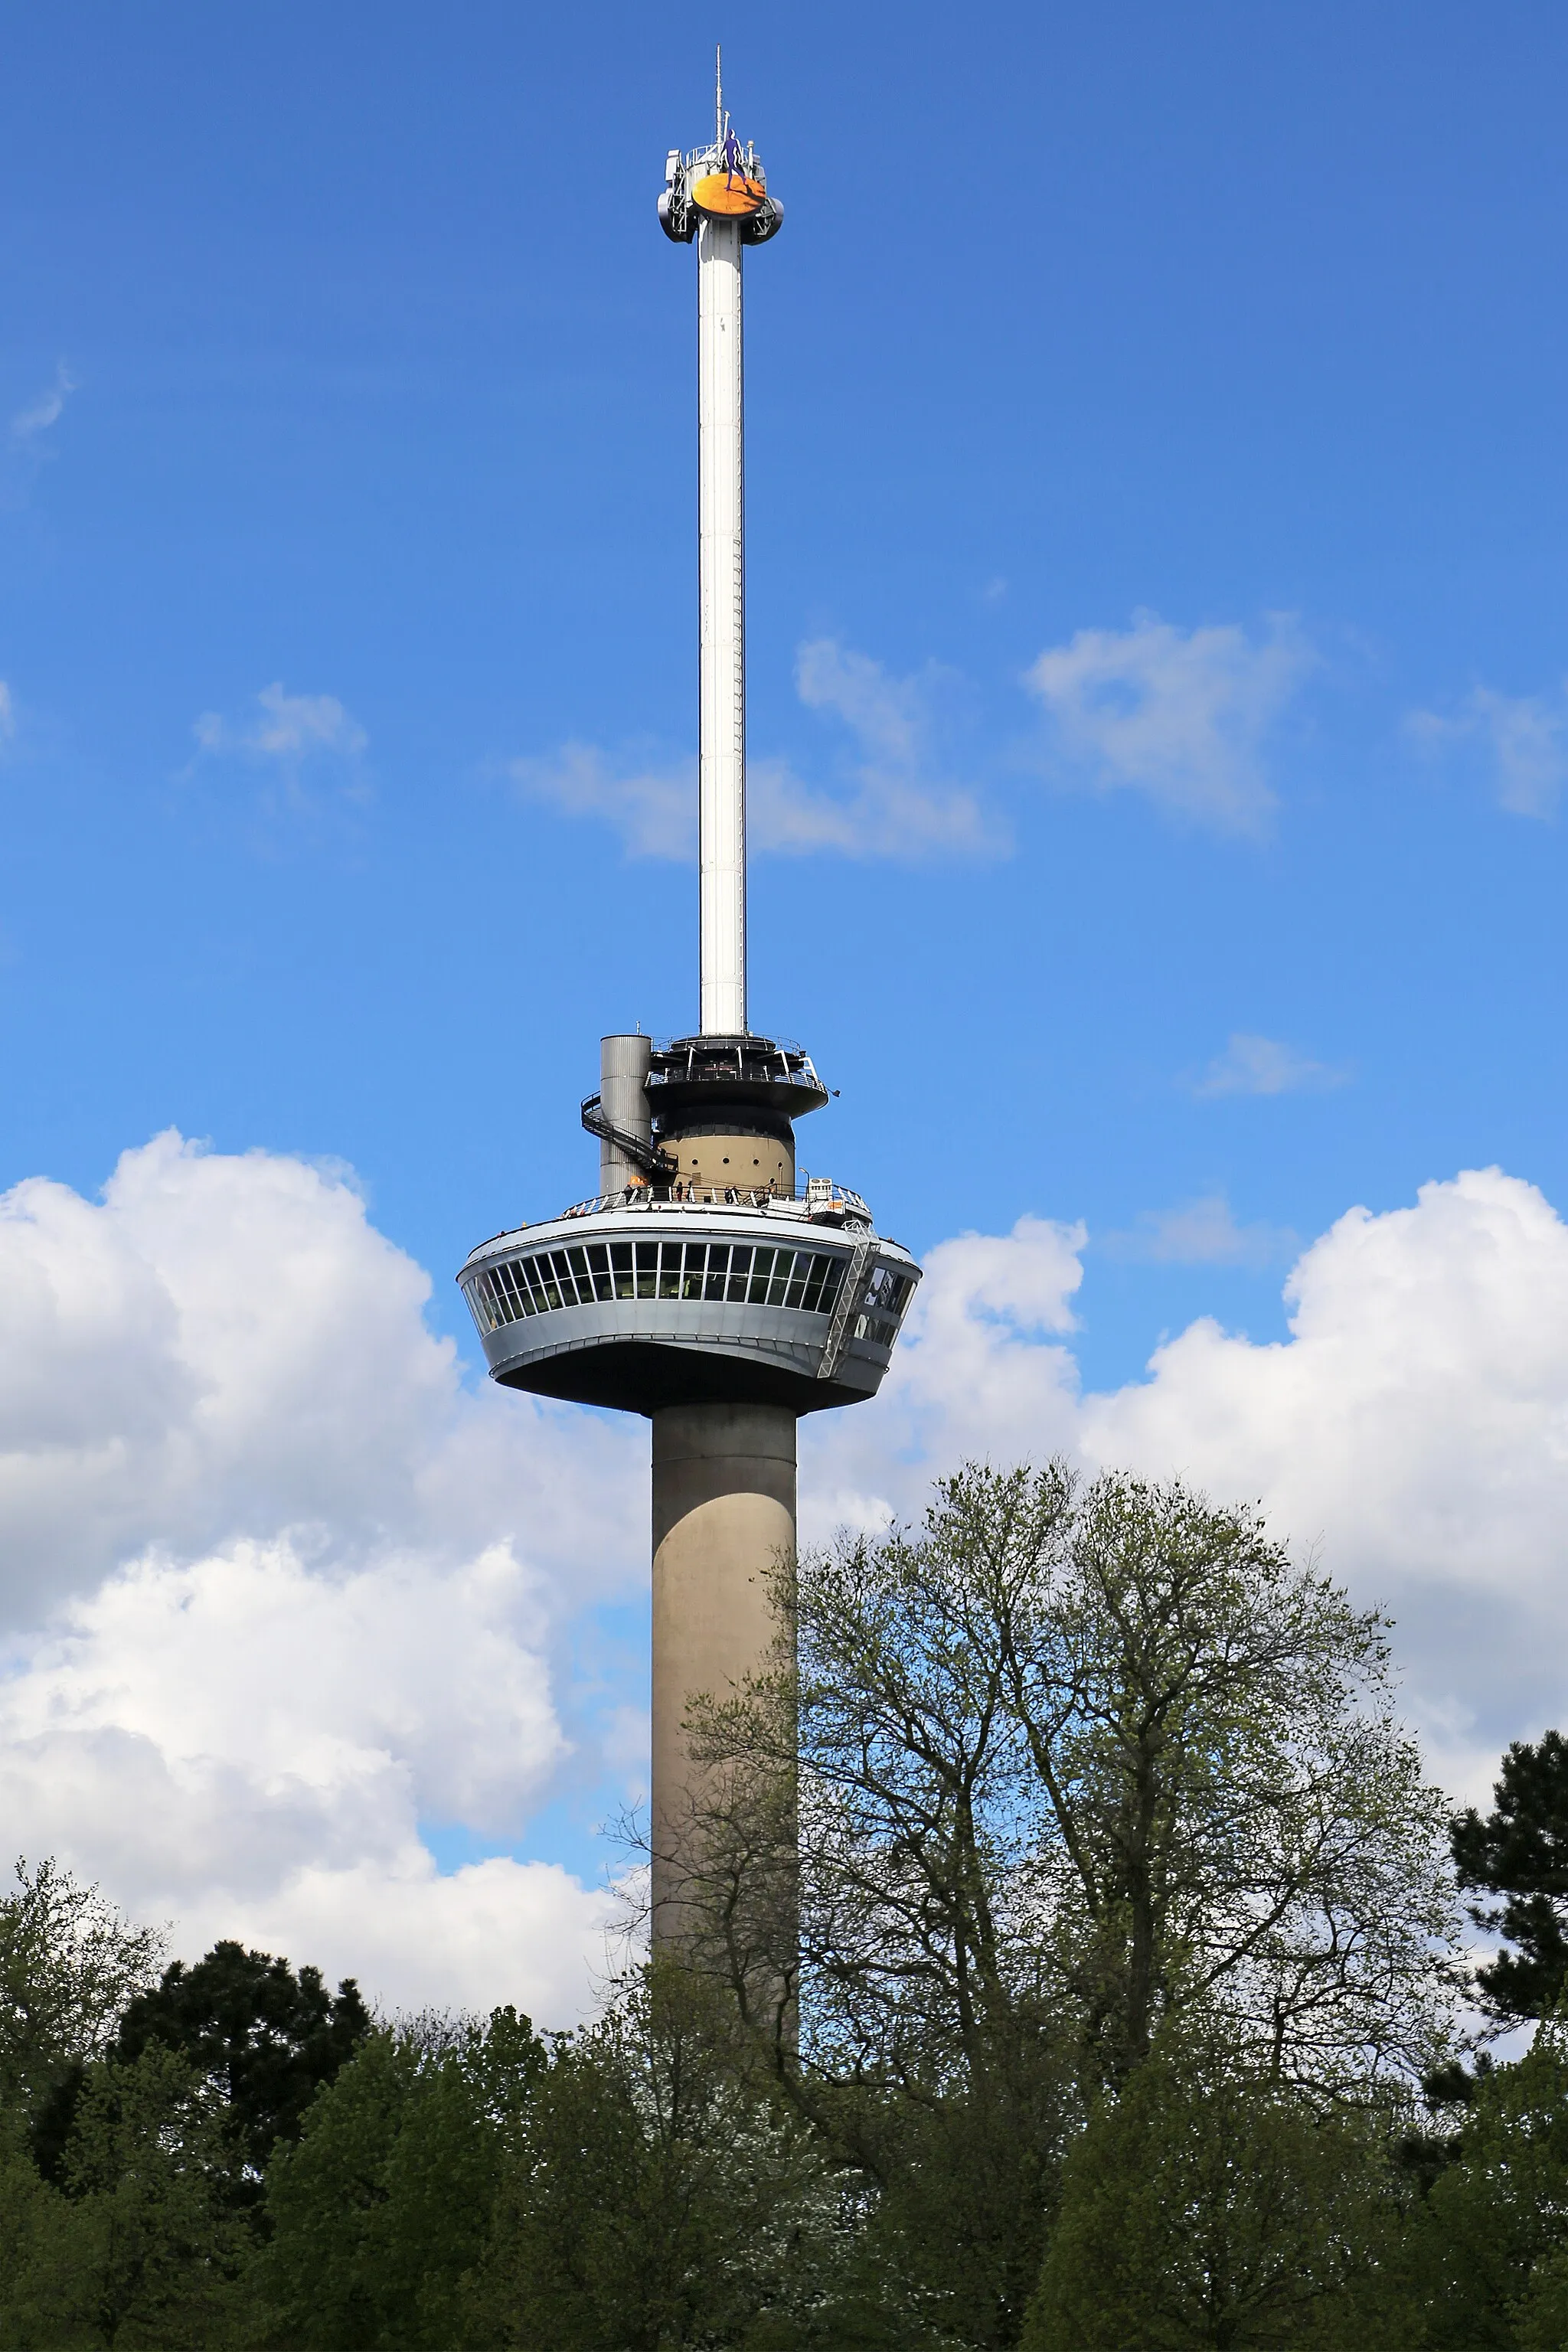 Photo showing: Spire of the Euromast (observation tower) in Rotterdam. The Euromast was erected in 1960 with a height of 100 meters. In 1970, the tower was expanded to a height of 185 meters with the 
Space Tower. The Euromast is the tallest building in the Netherlands.